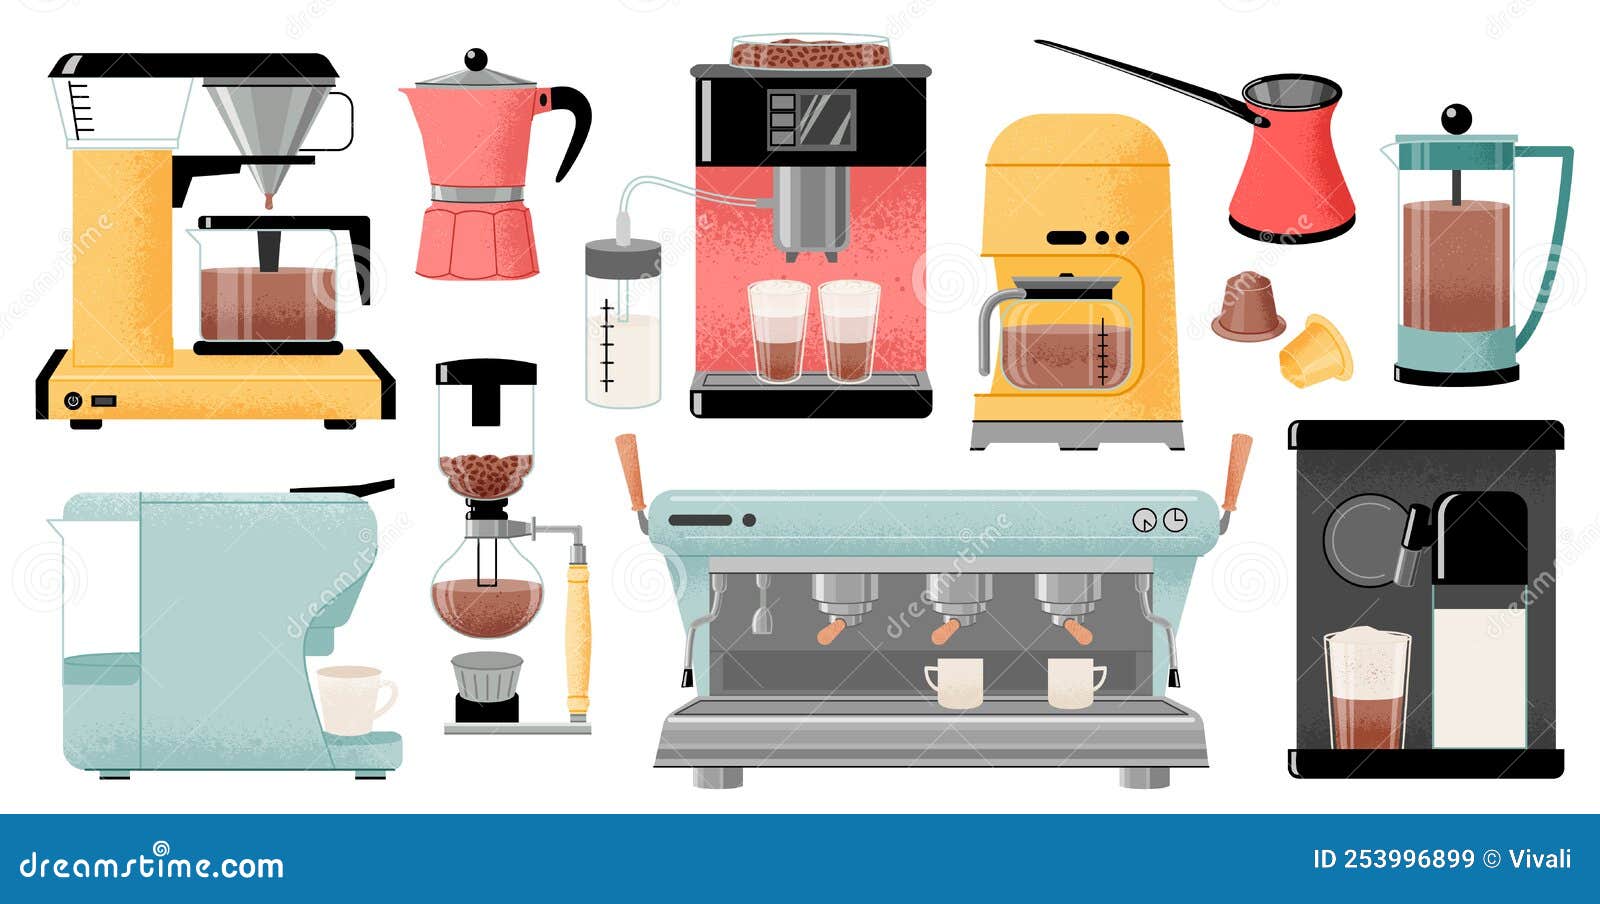 Barista Tools Set. Equipment For Various Ways Of Coffee Brewing